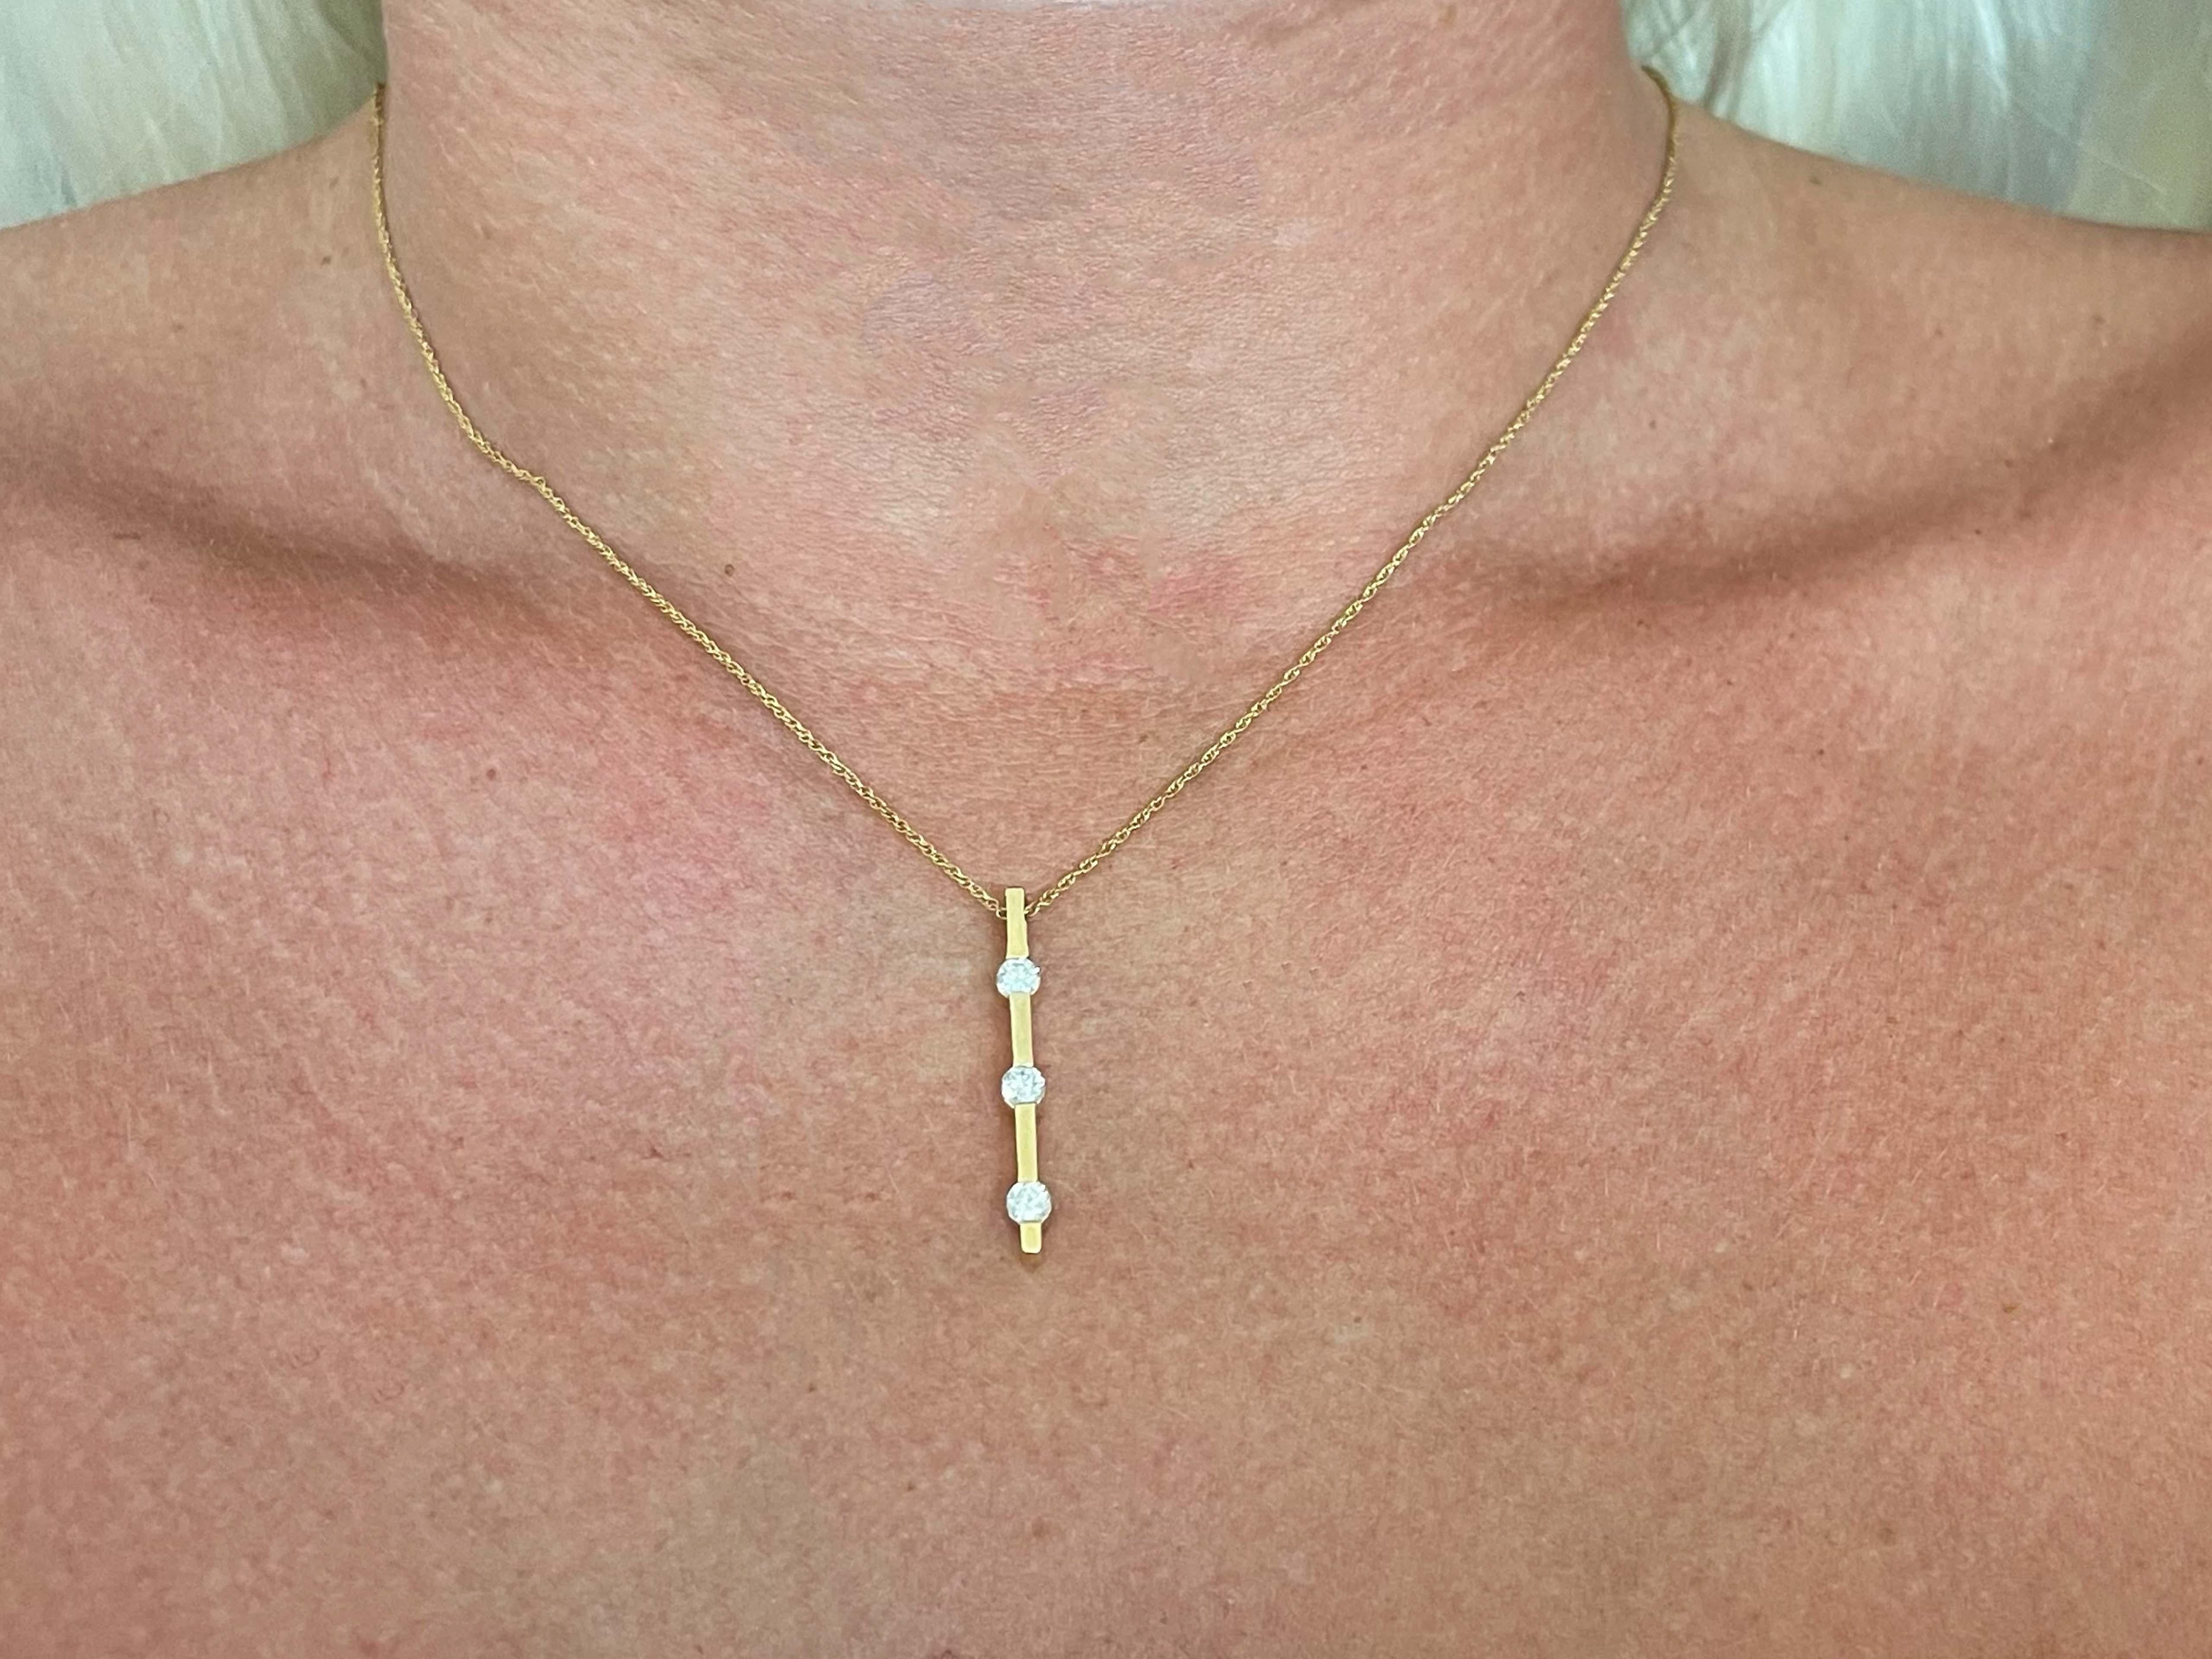 Item Specifications:

Necklace Metal: 14k Yellow Gold

Total Weight: 2.6 Grams

Chain Length: 16